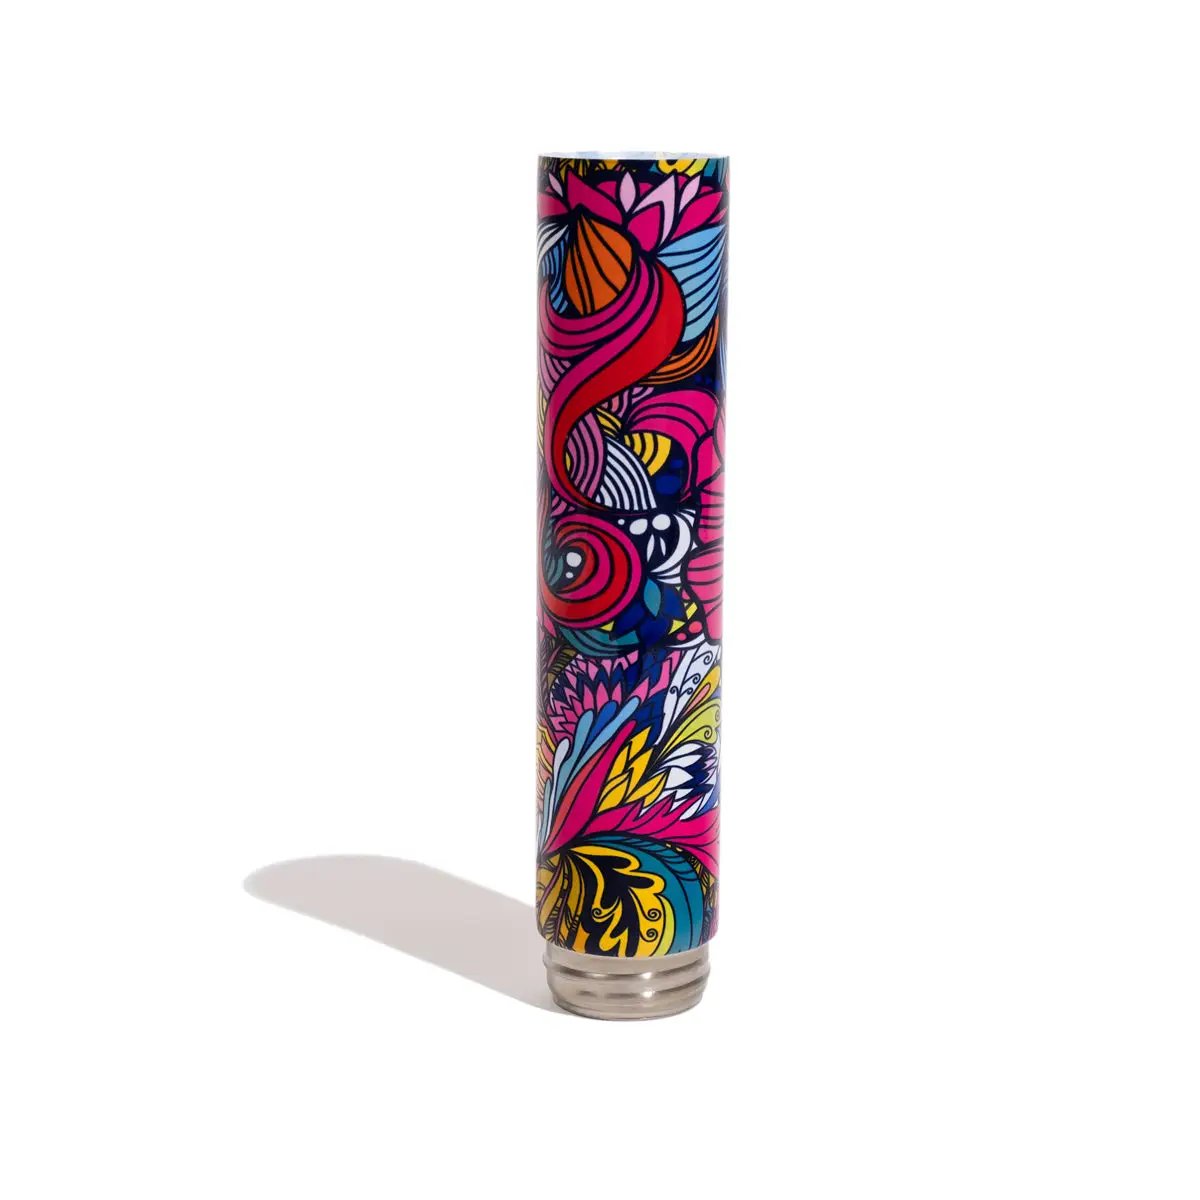 Gloss Blue & Floral Coloring Book Combo by Chill Steel Pipes